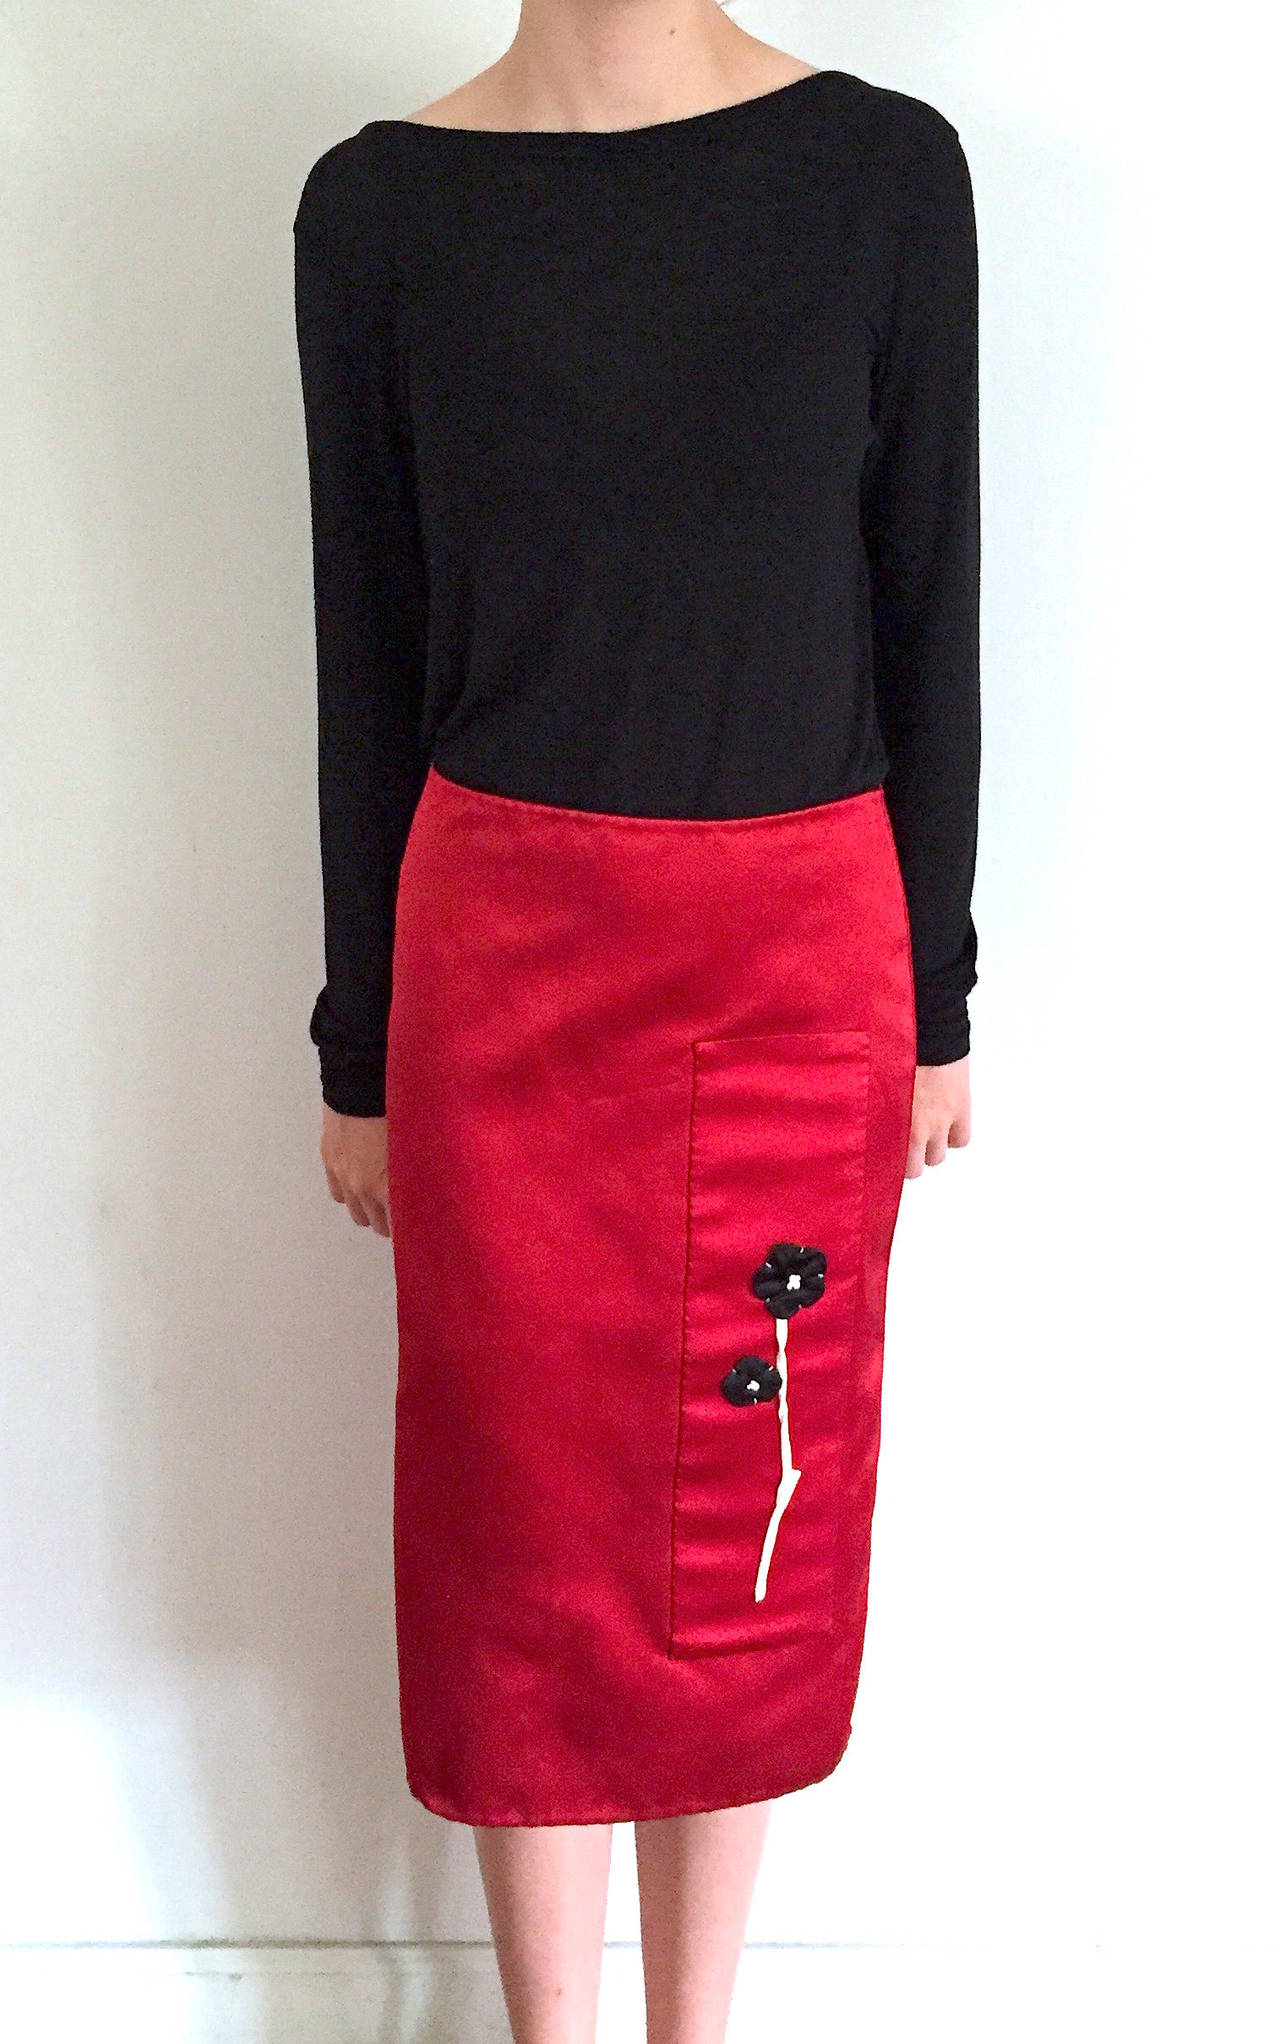 Prada runway red satin skirt with black and white flower applique from the mid-2000s. Features a back zippered closure and slit at bottom back, and hits below the knee.